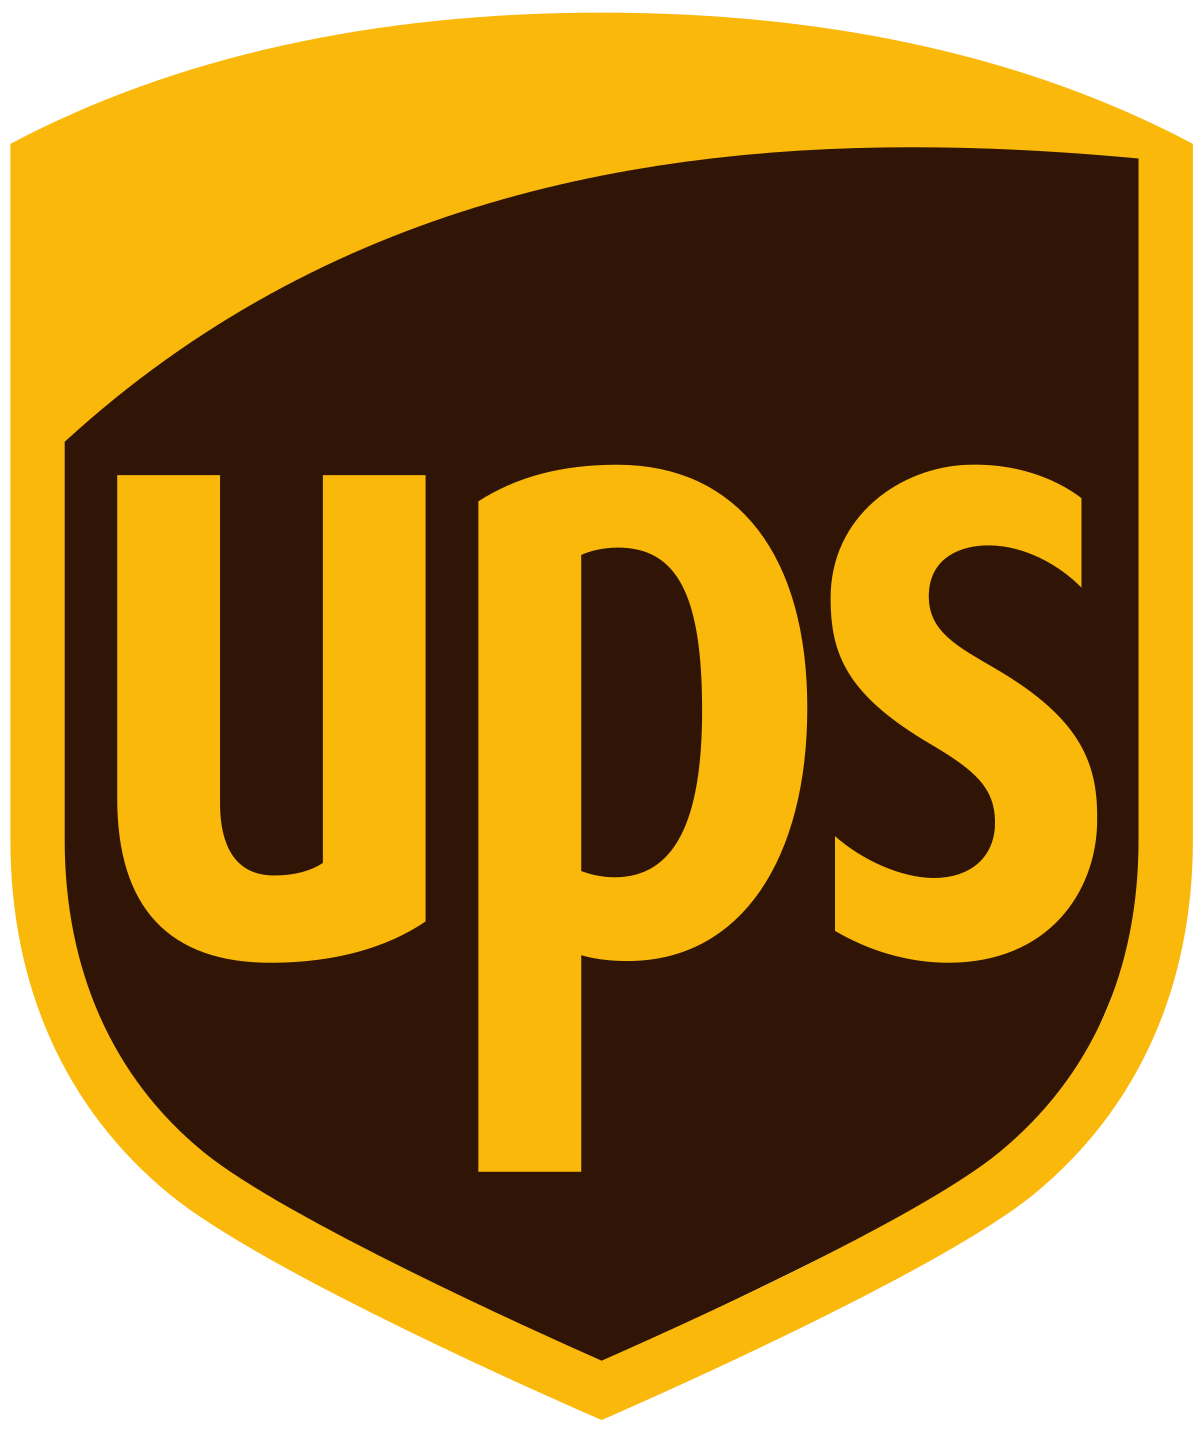 United parcel service wikipedia. Traveling clipart overnight shipping